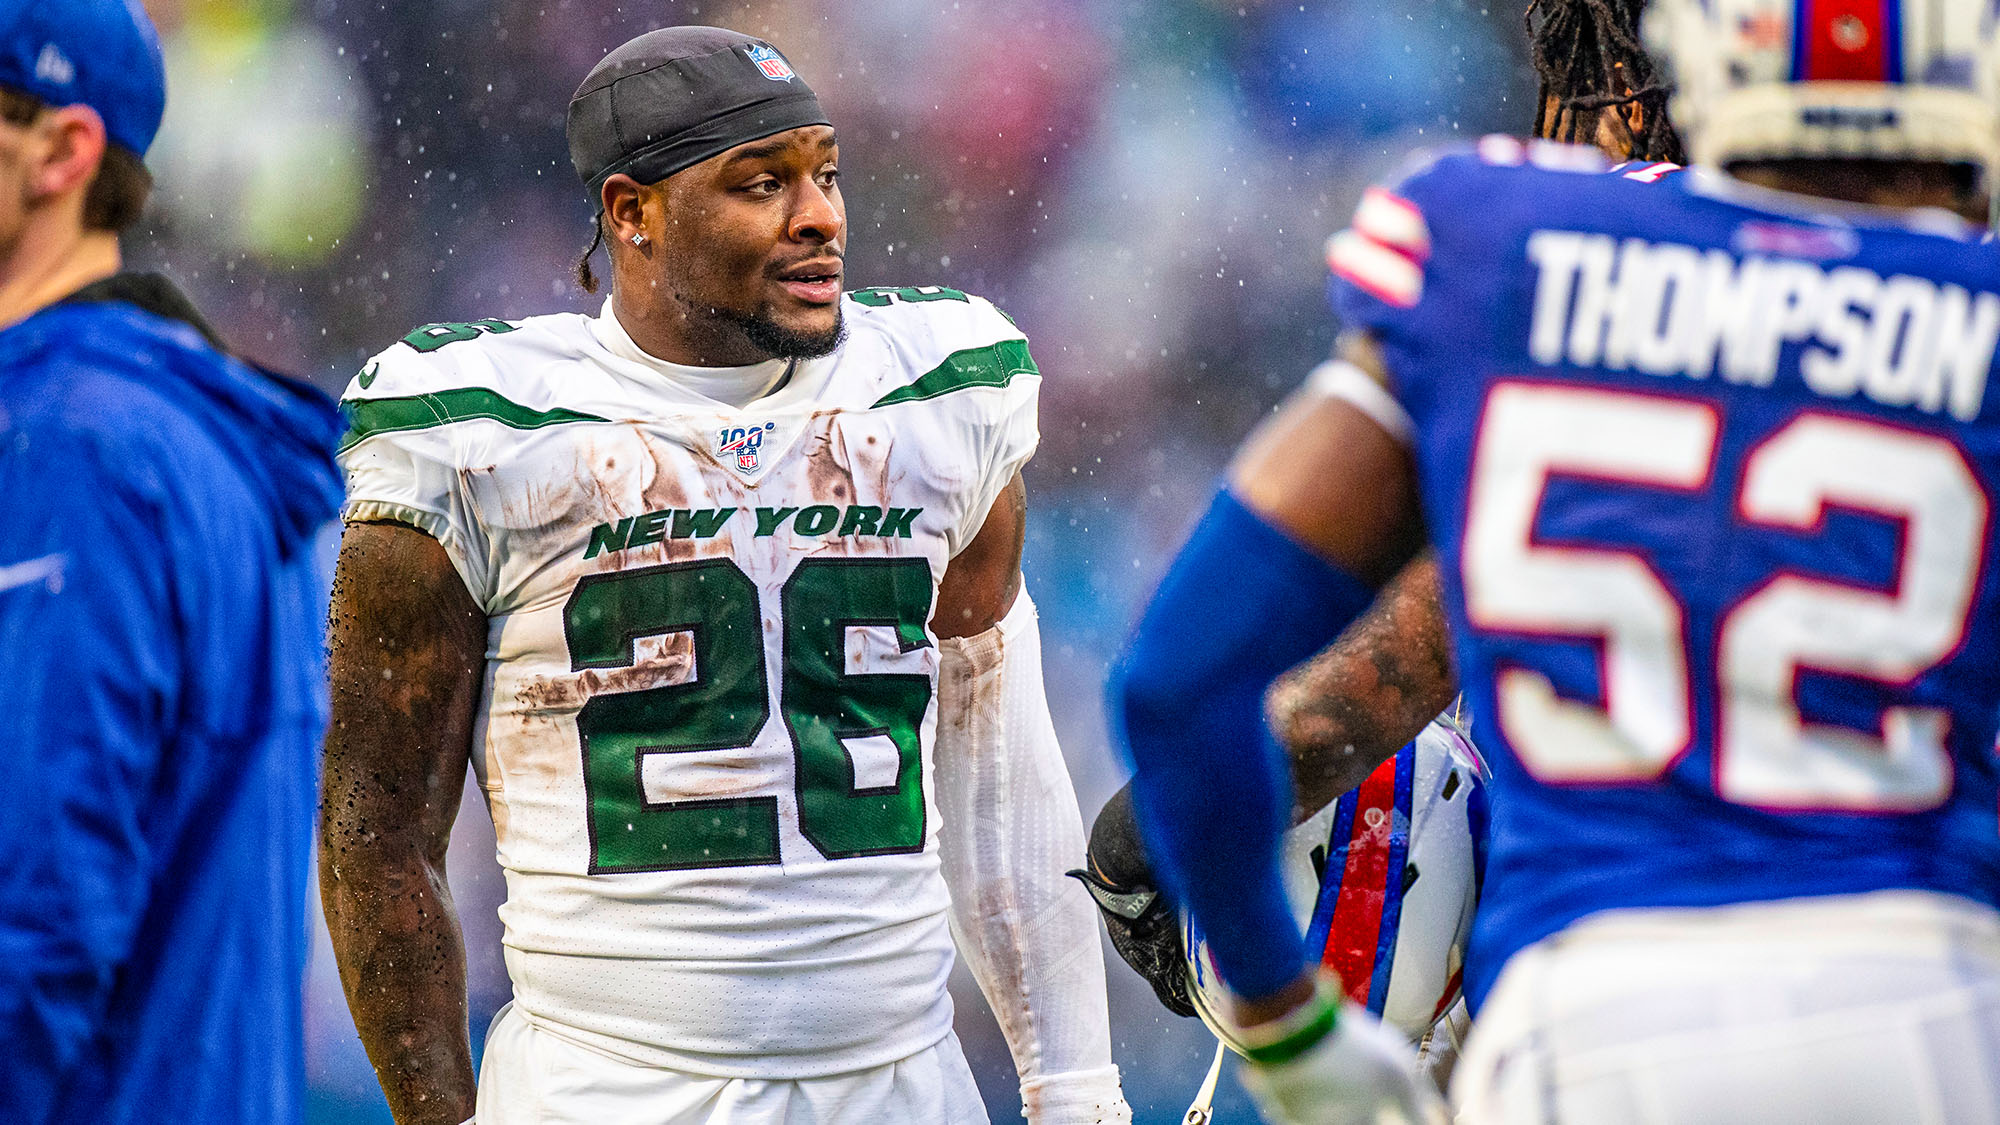 Le'Veon Bell, New York Jets, Boxing, Match, Adrian Peterson